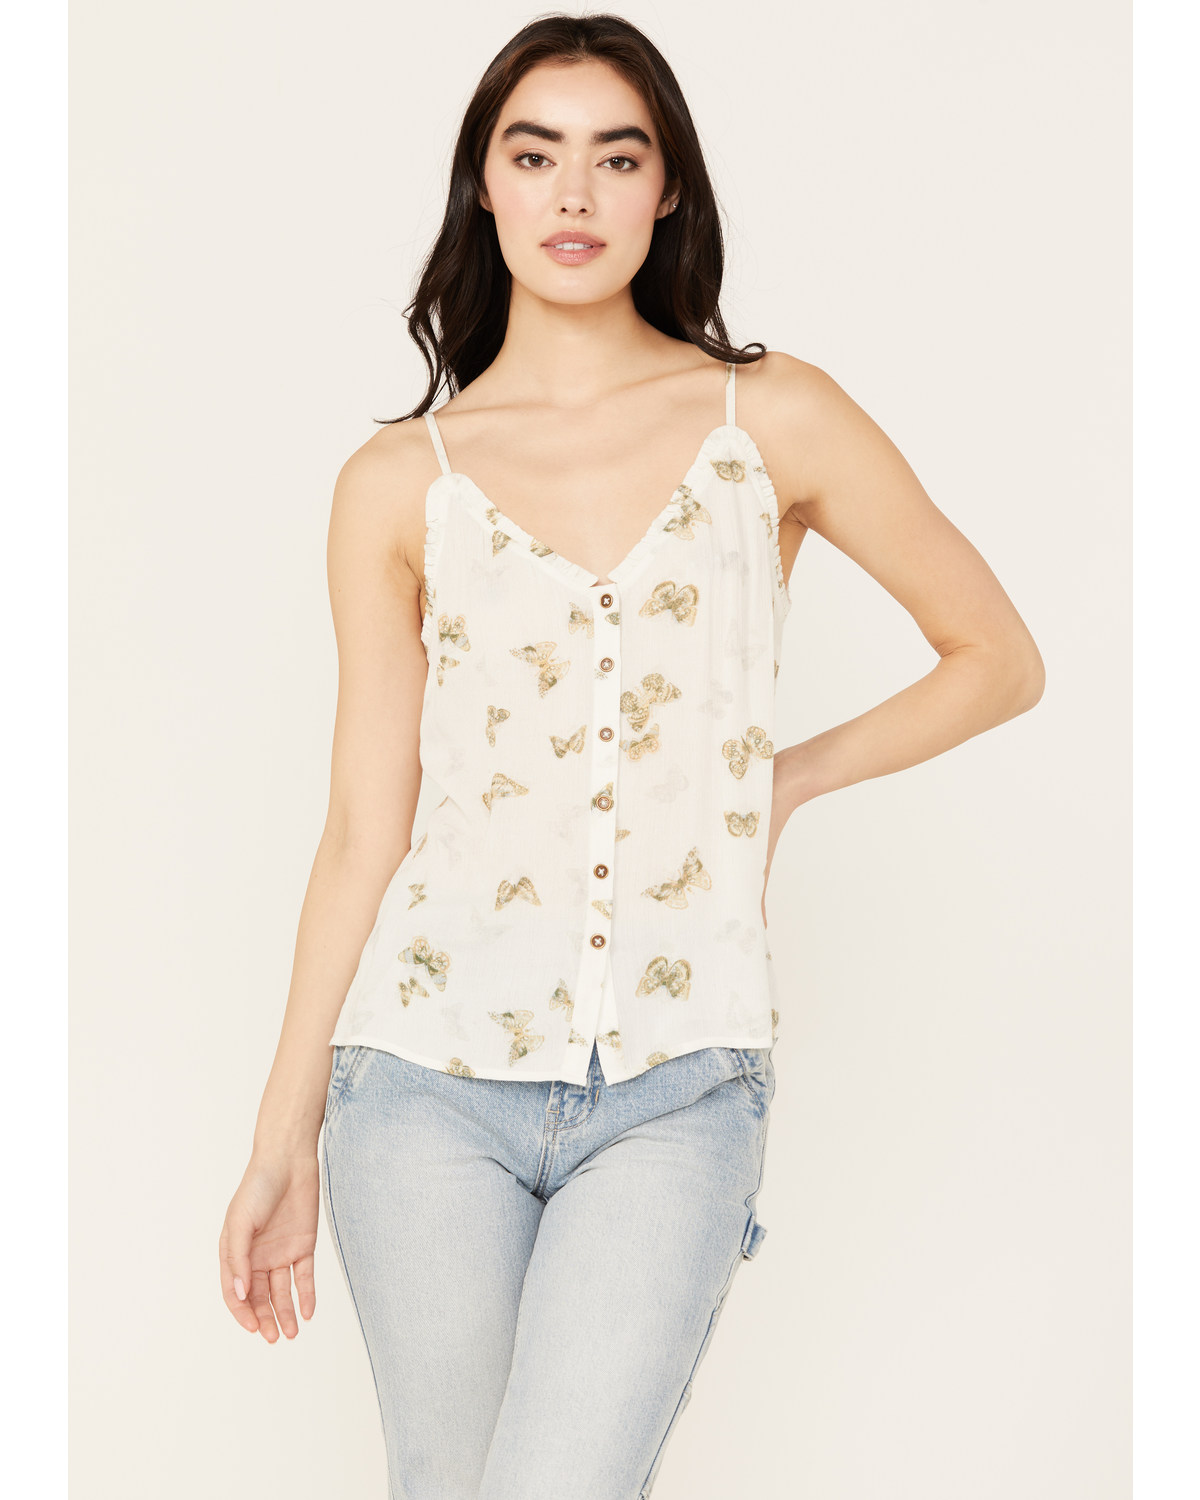 Cleo + Wolf Women's Butterfly Cropped Cami